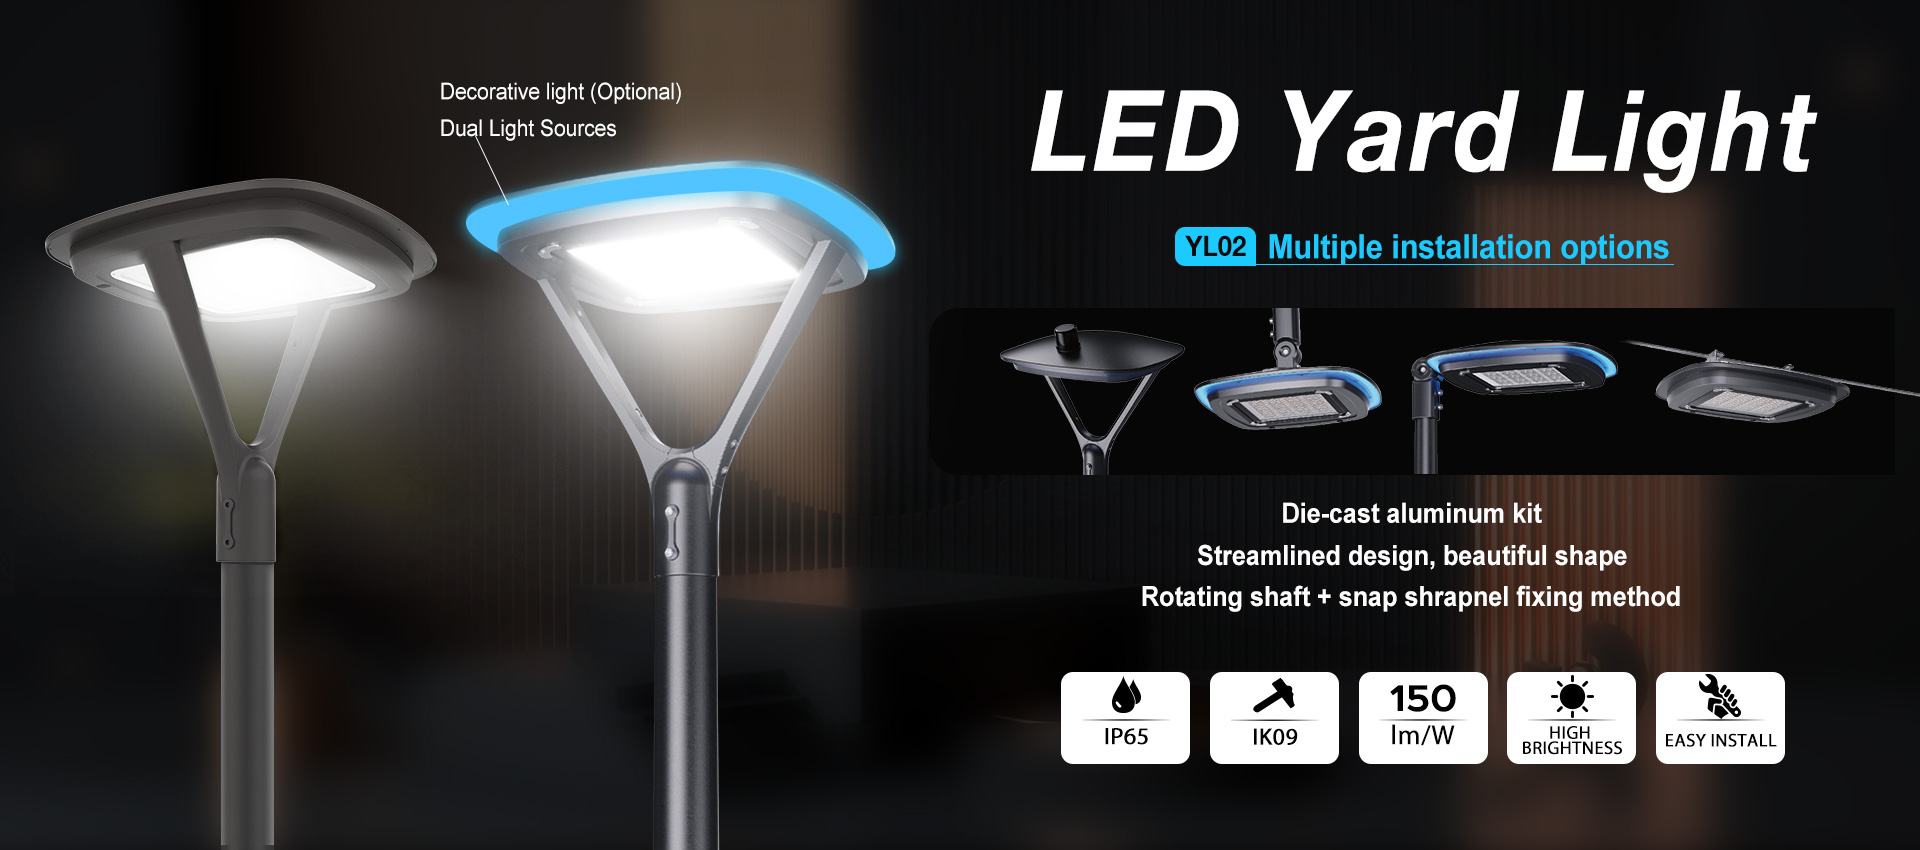 https://www.hipowerled.com/collections/led-yard-light